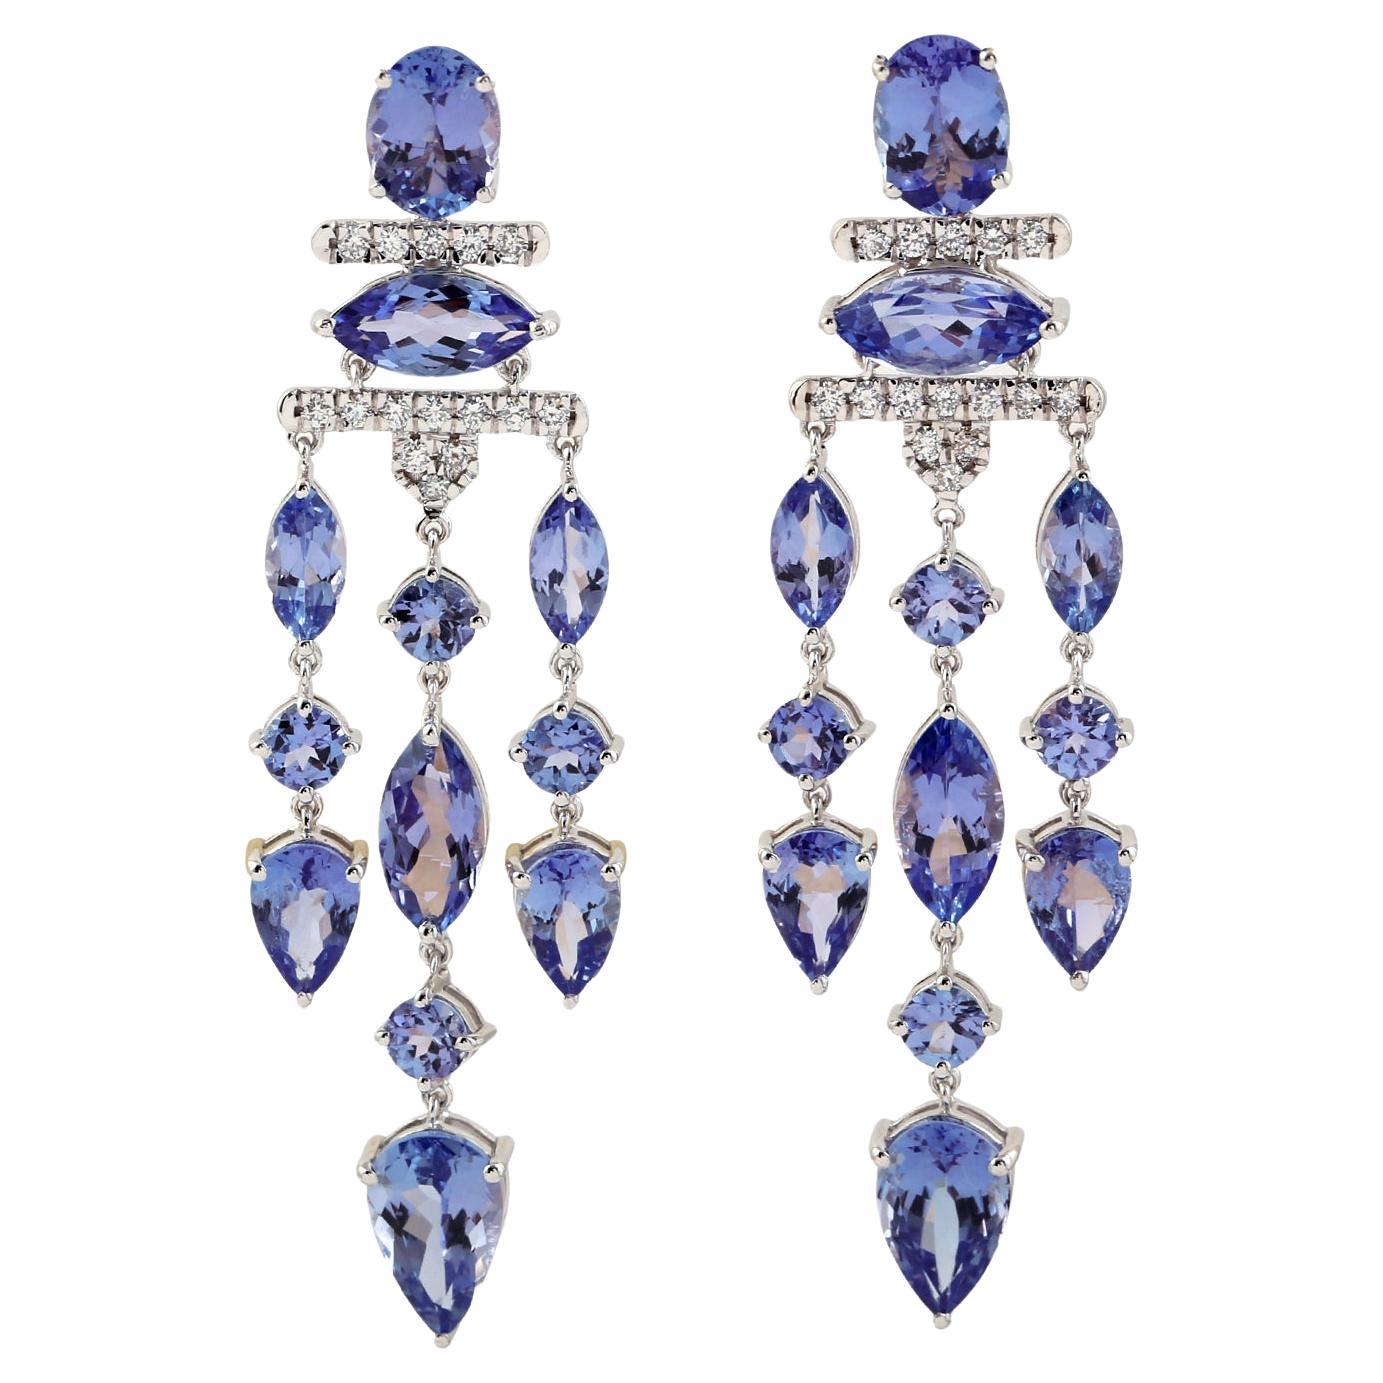 Multishaped Tanzanite Waterfall Earrings With Diamonds Made In 18k Gold For Sale